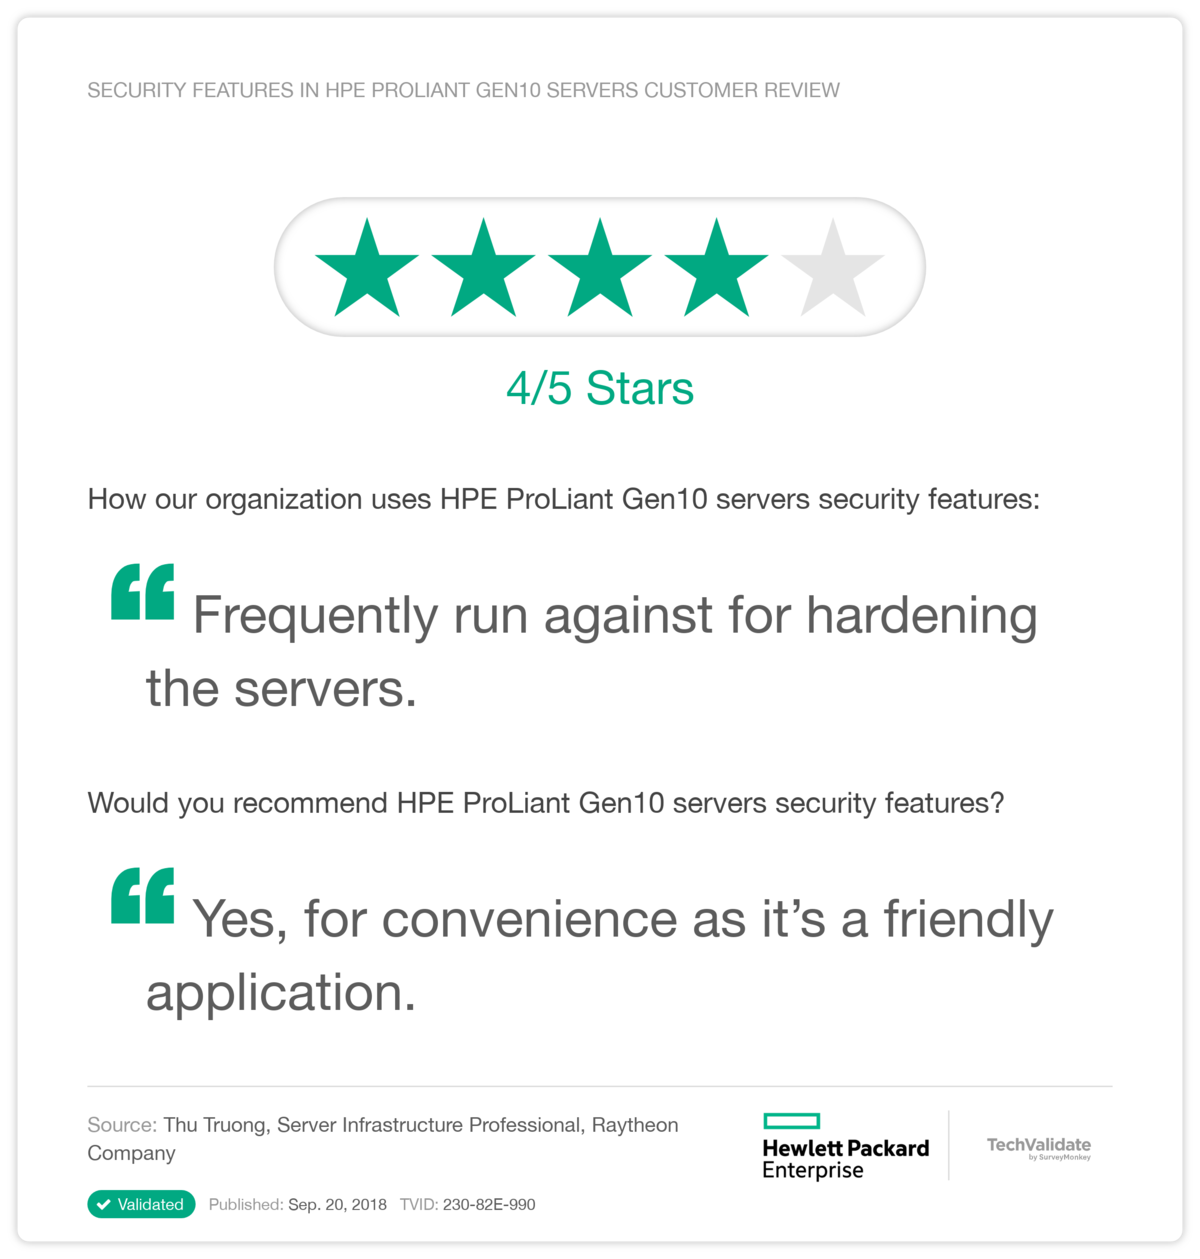 security features in HPE ProLiant Gen10 servers Customer Review